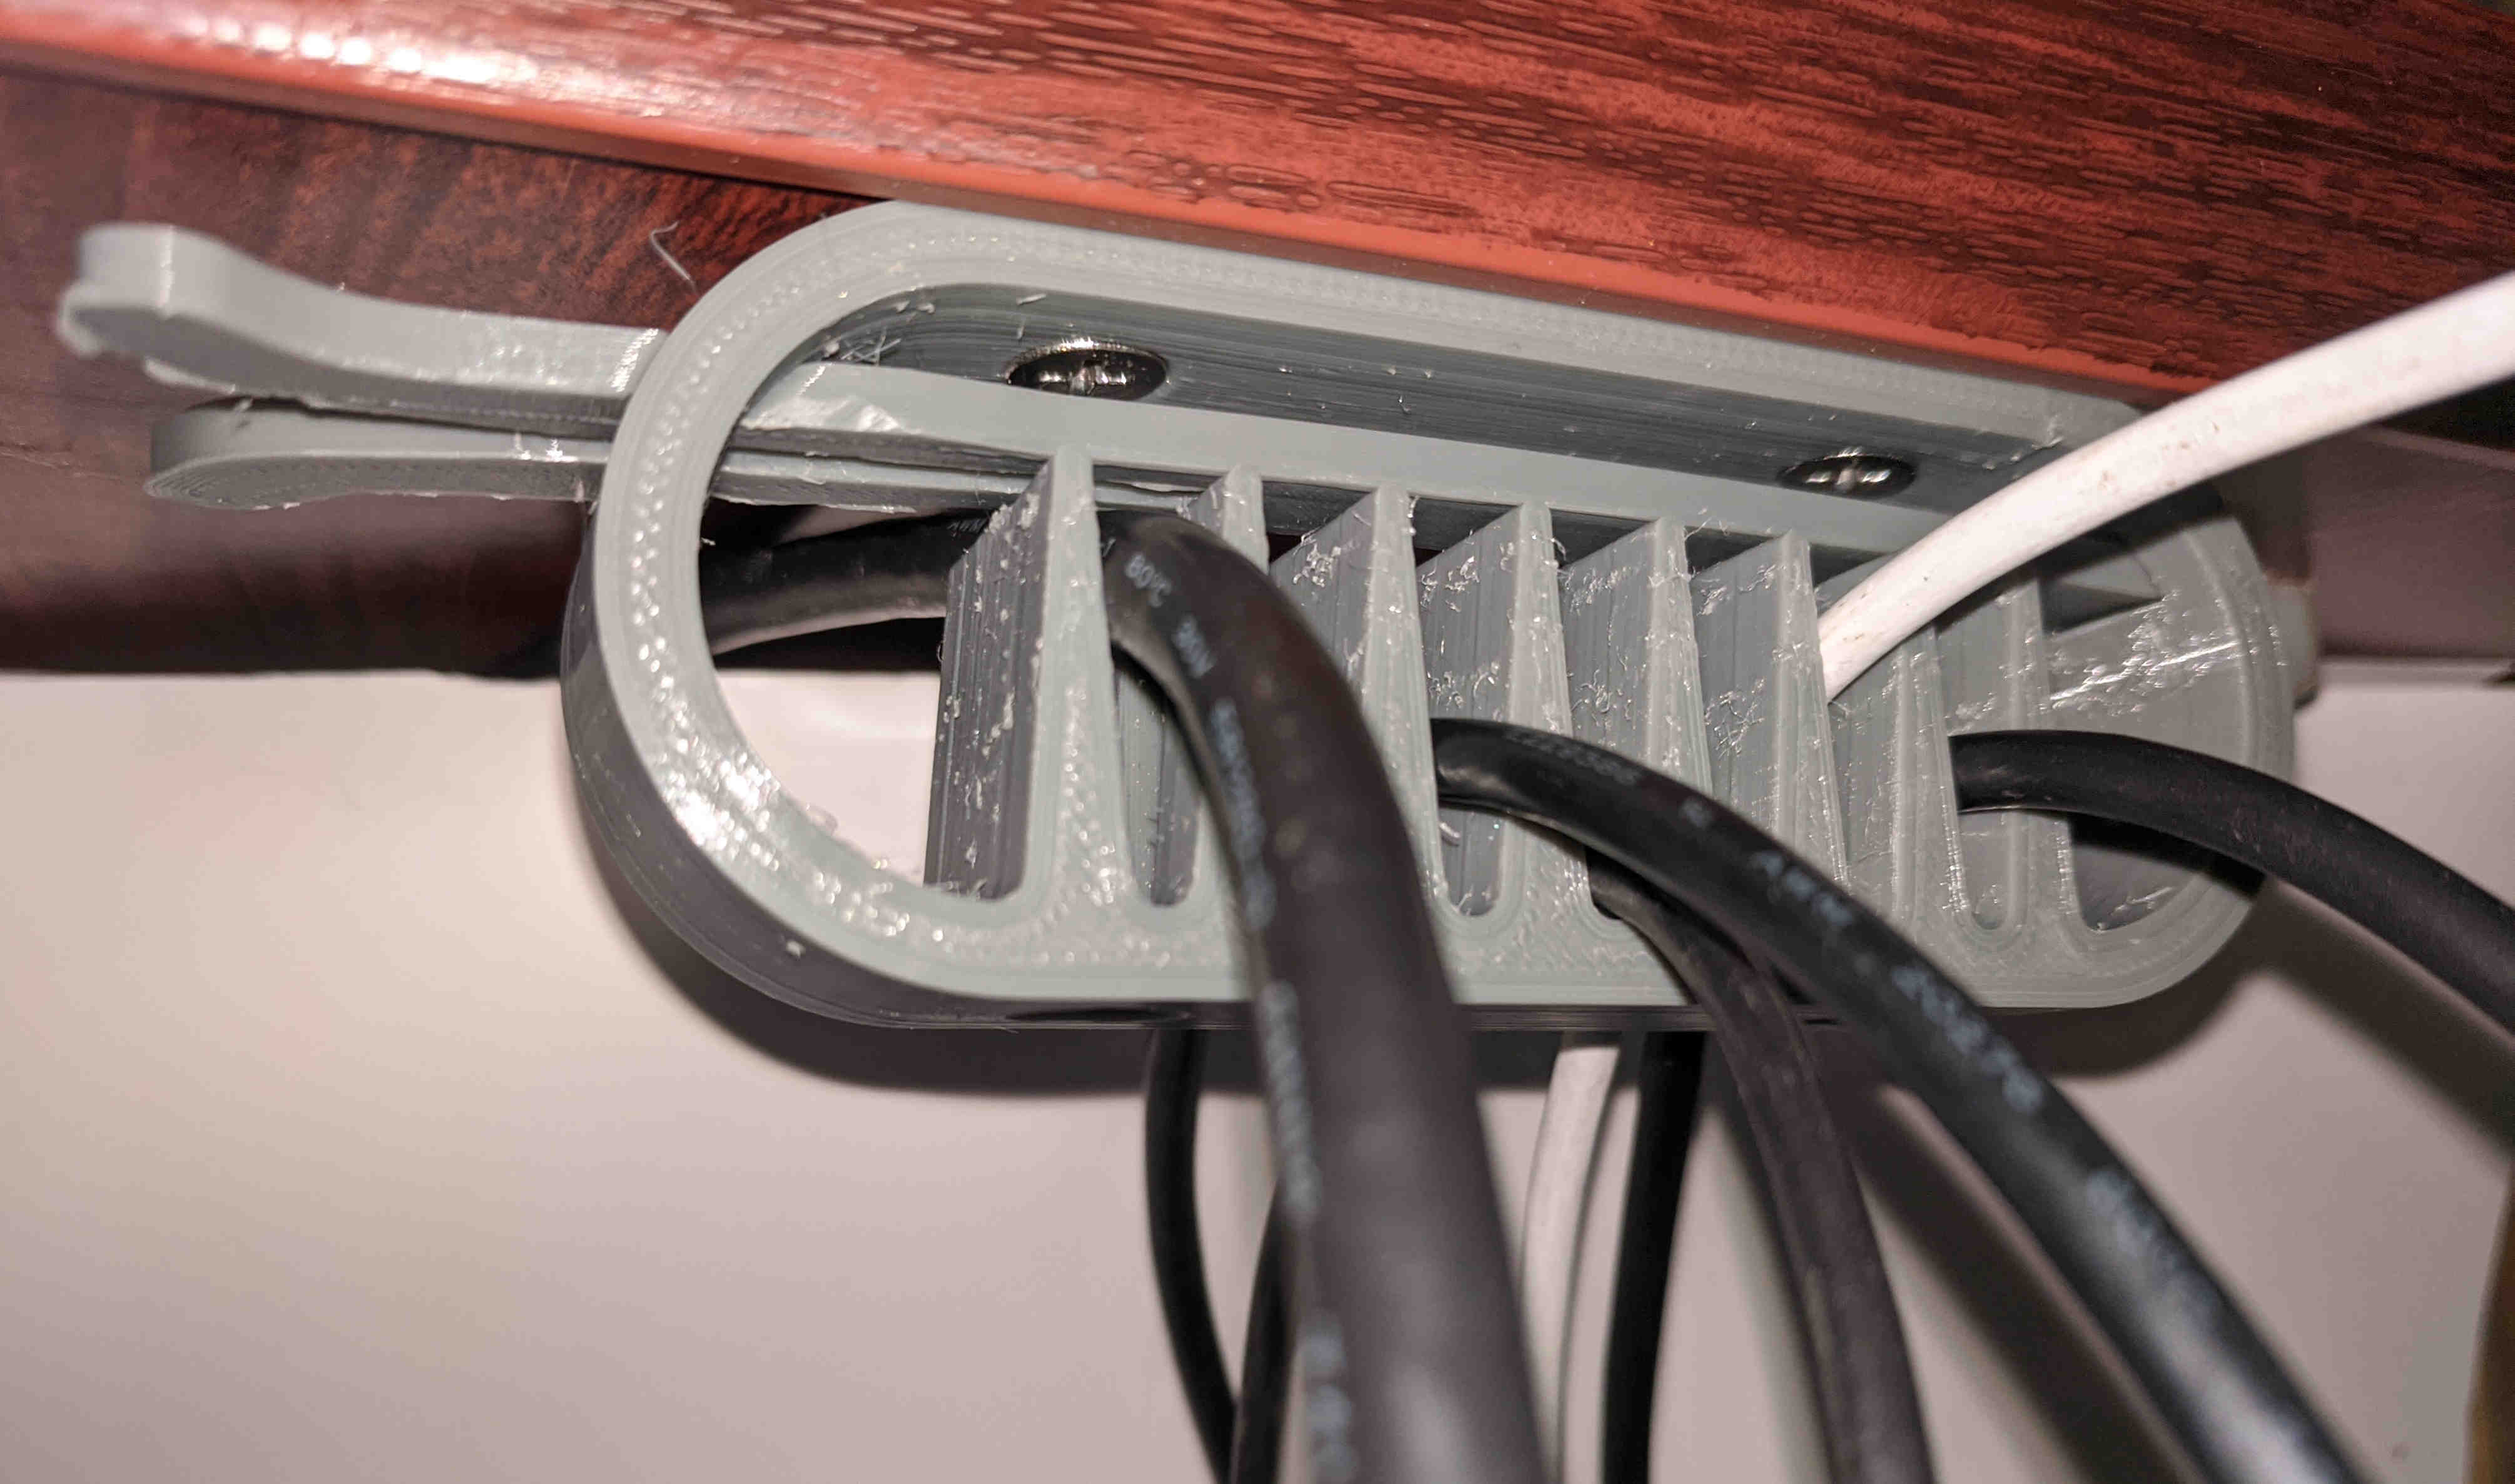 Under Desk Cable Management with Cable Lock